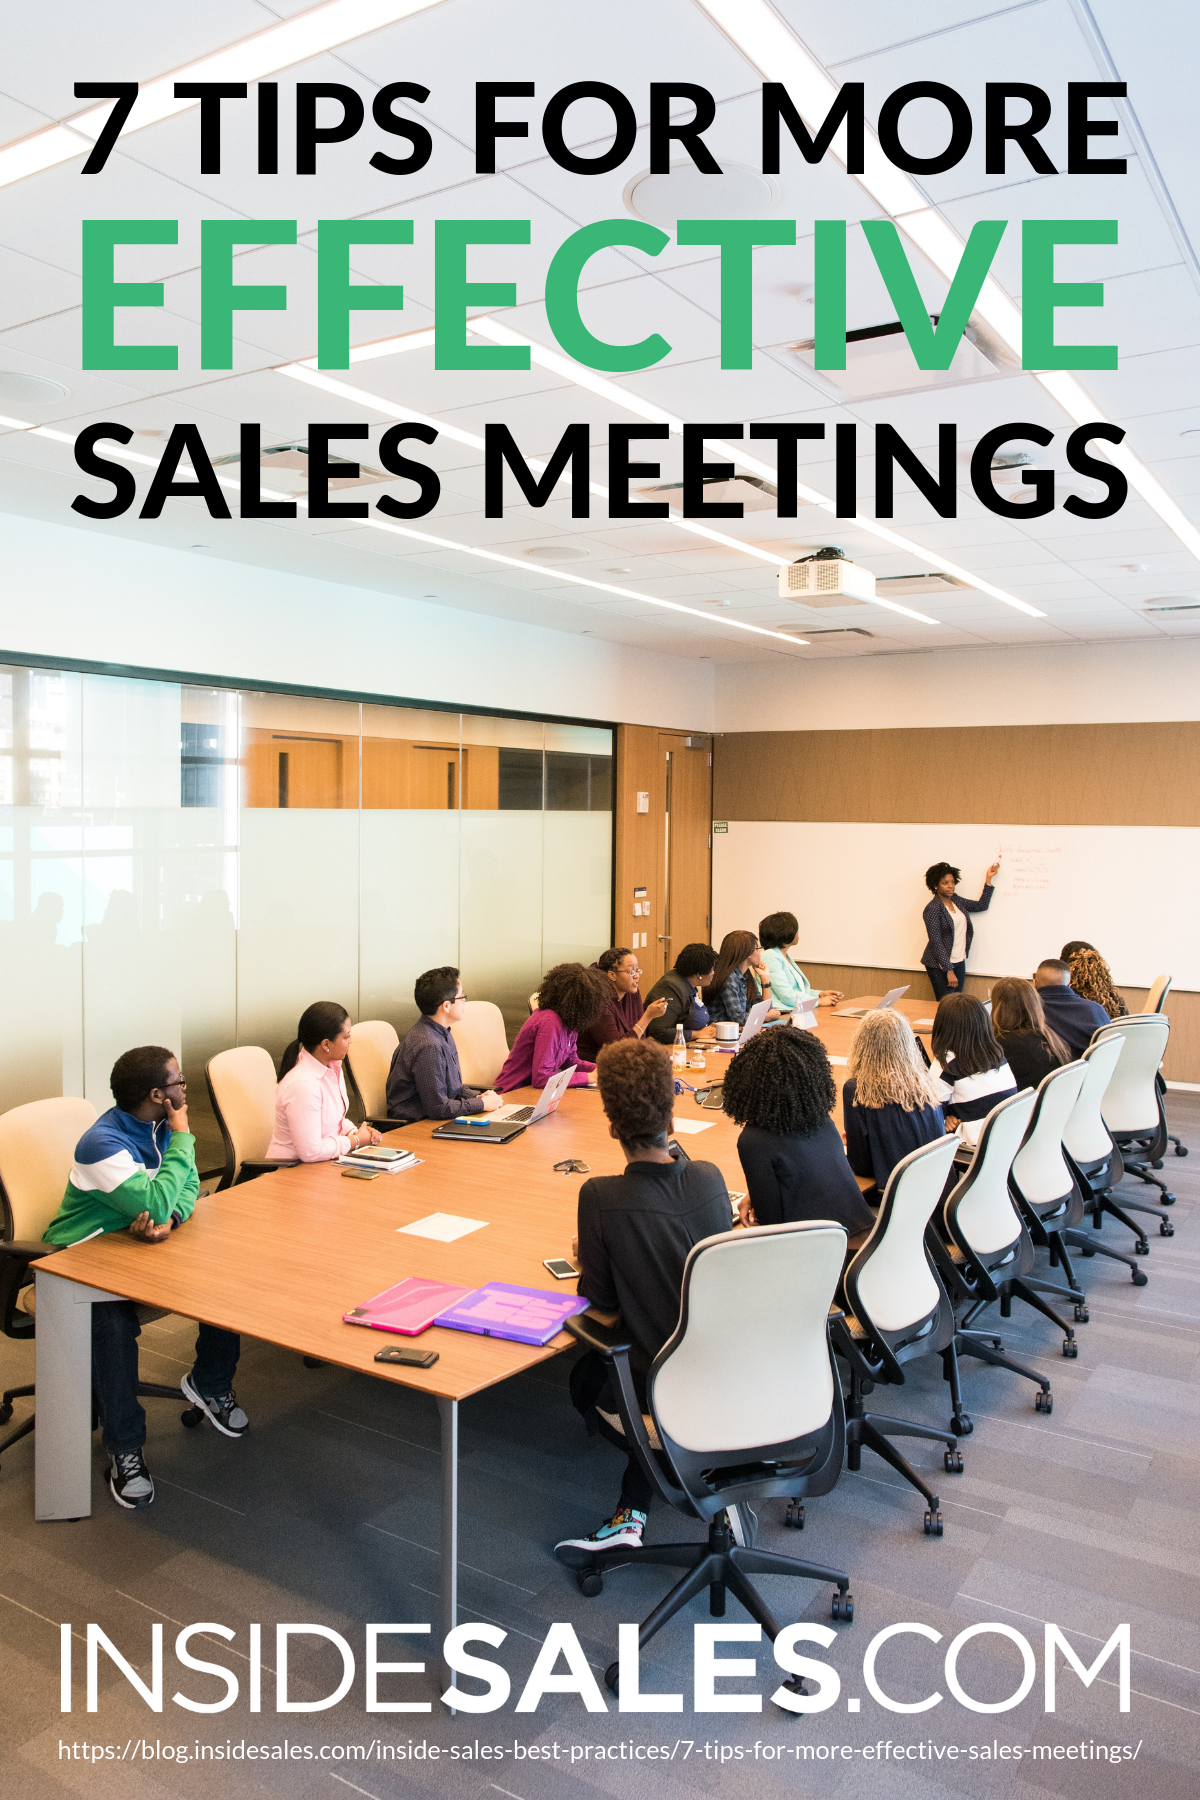 7 Tips For More Effective Sales Meetings [INFOGRAPHIC] https://www.insidesales.com/blog/inside-sales-best-practices/7-tips-for-more-effective-sales-meetings/